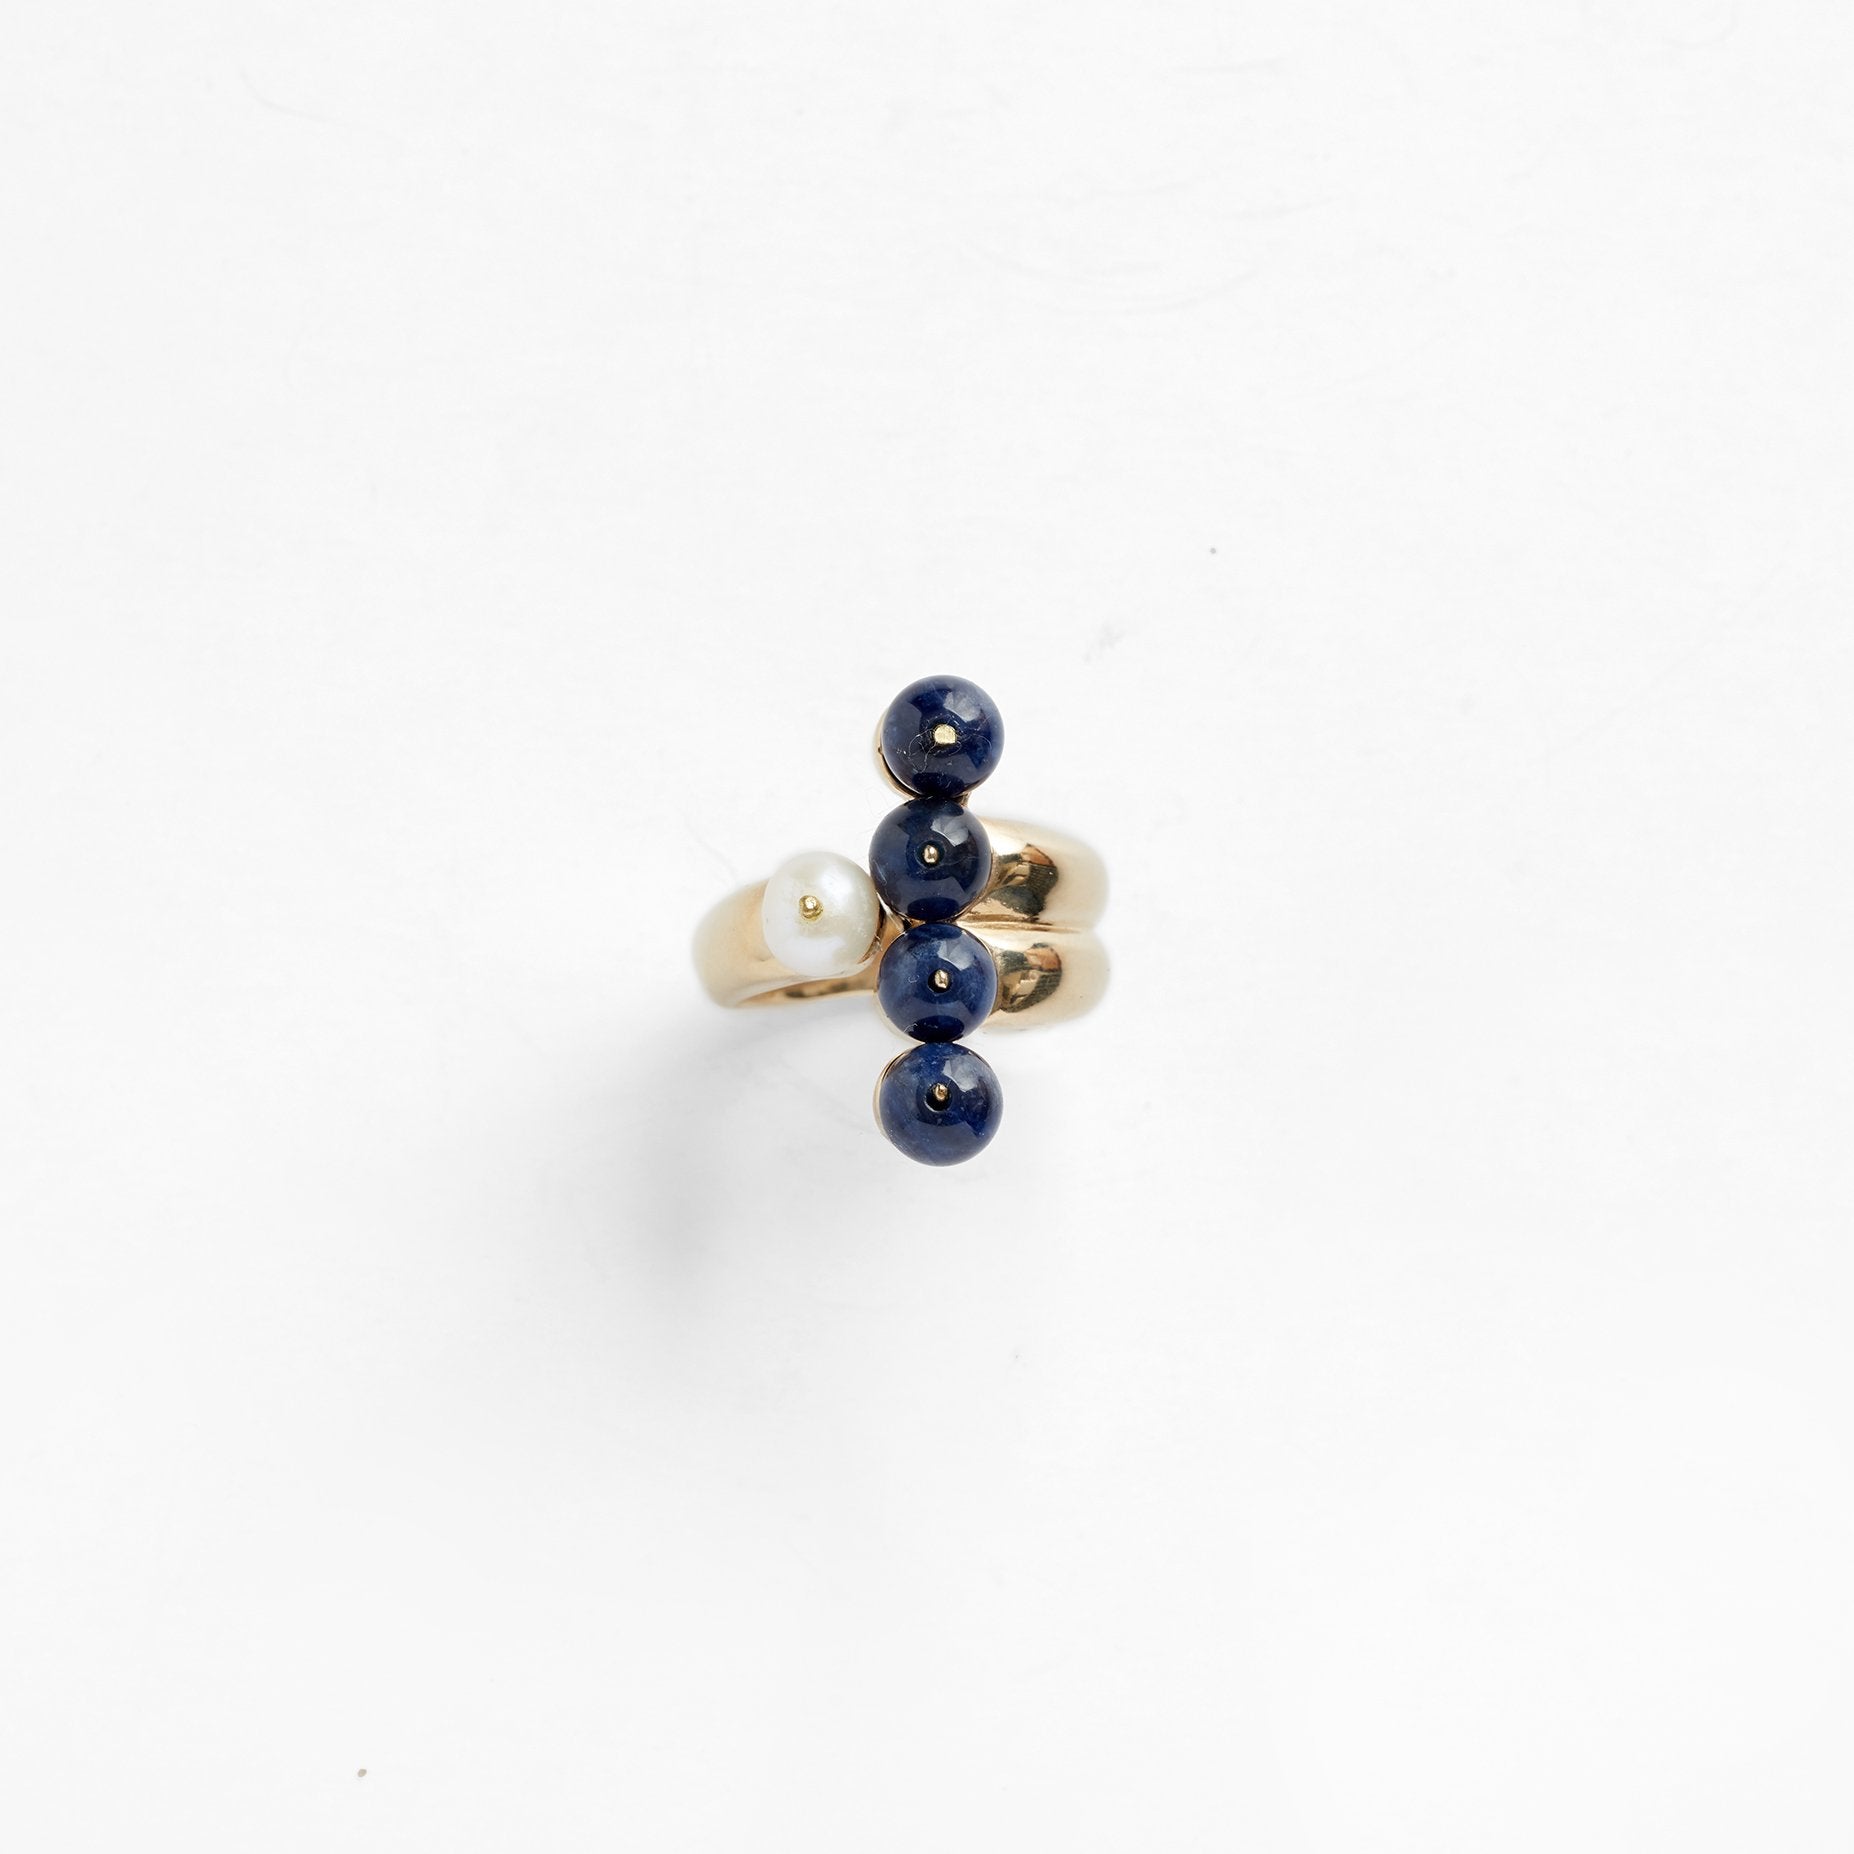 Pichulik | North Star Ring crafted in Brass with Pearls